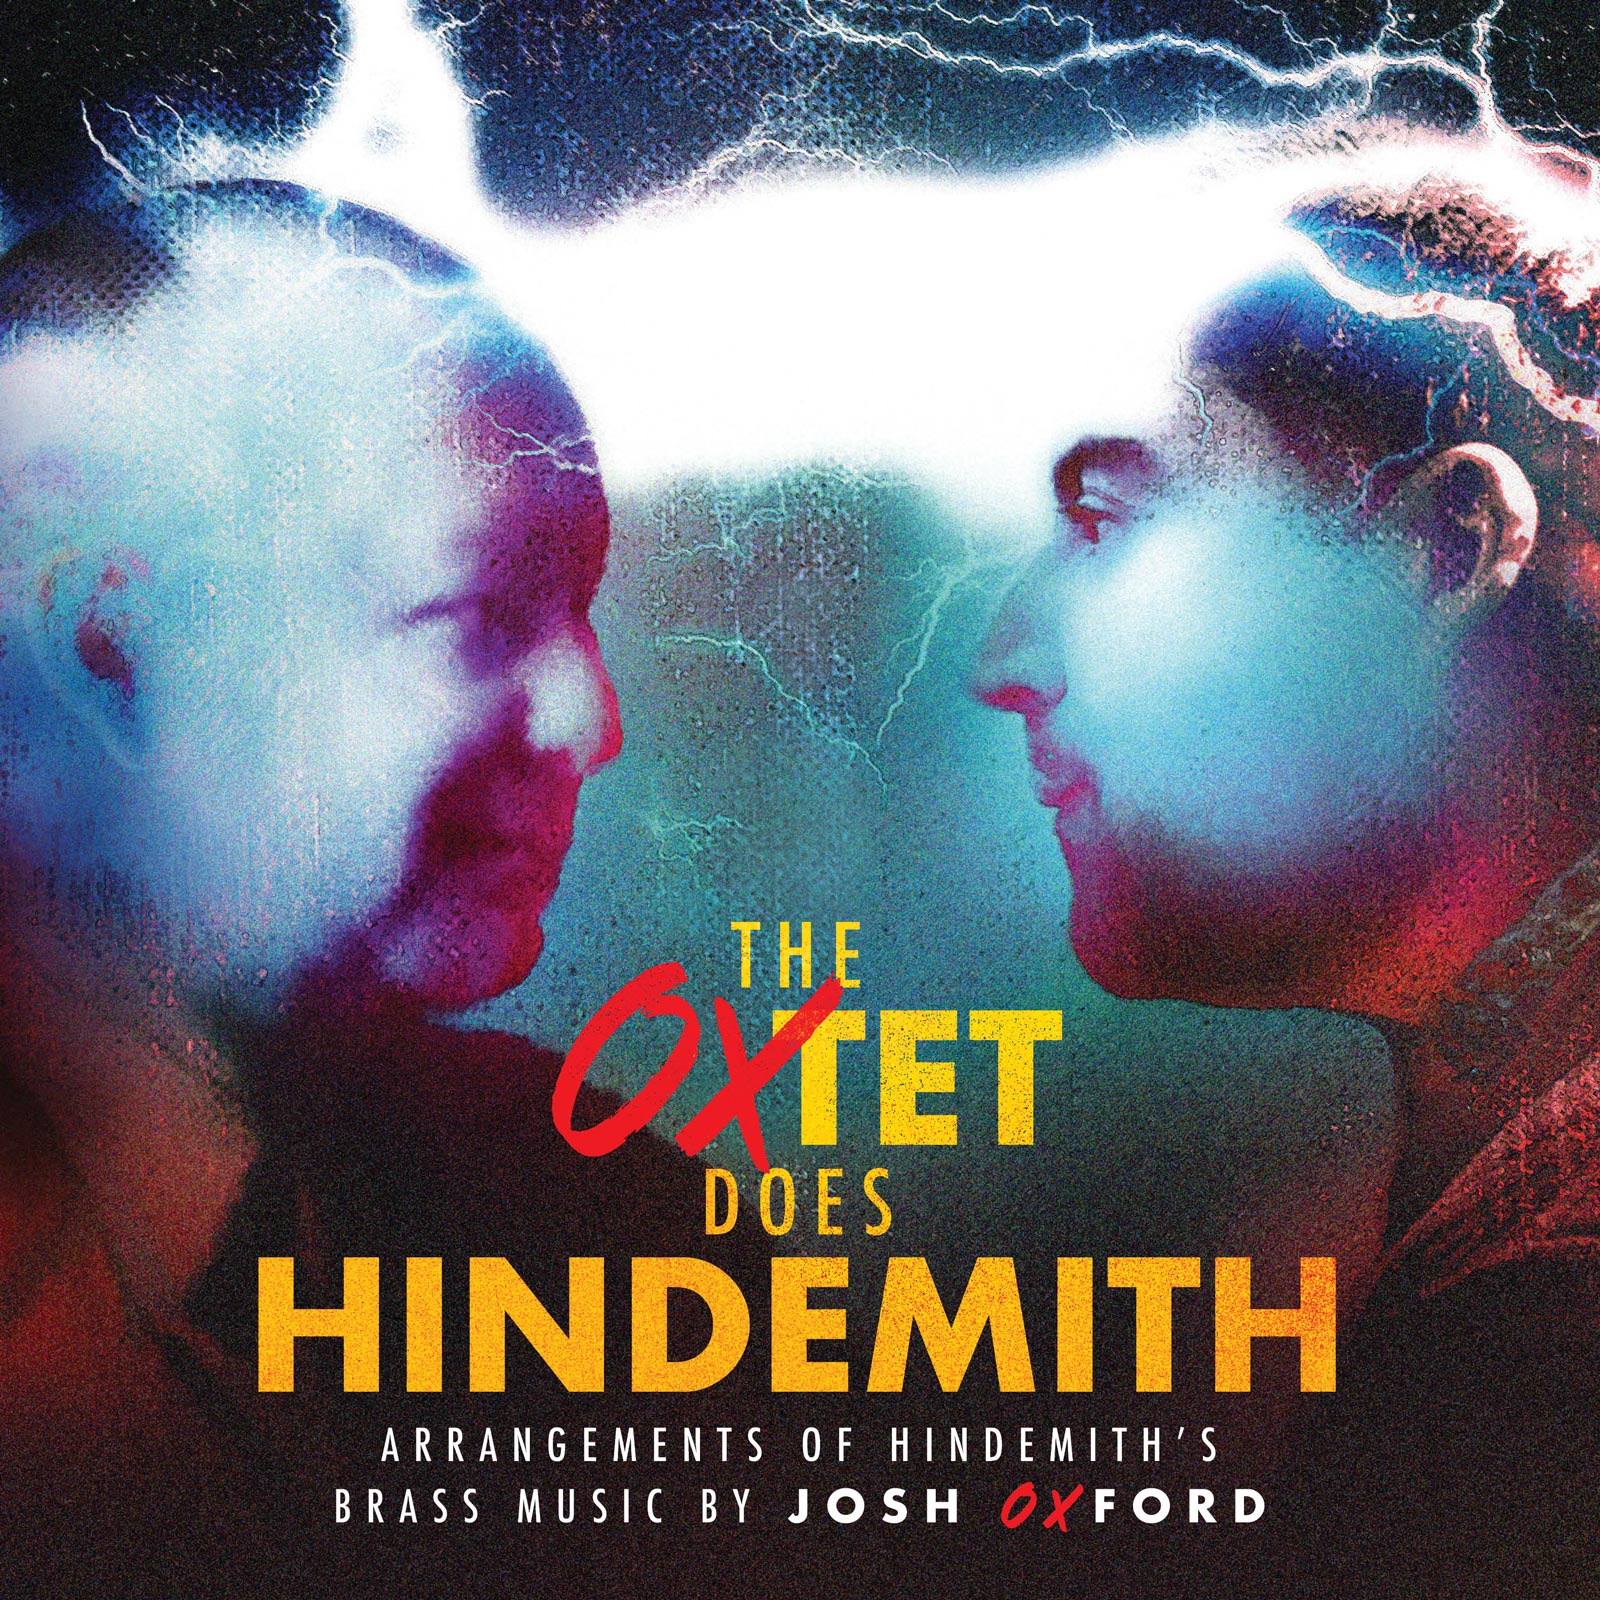 THE OXTET DOES HINDEMITH